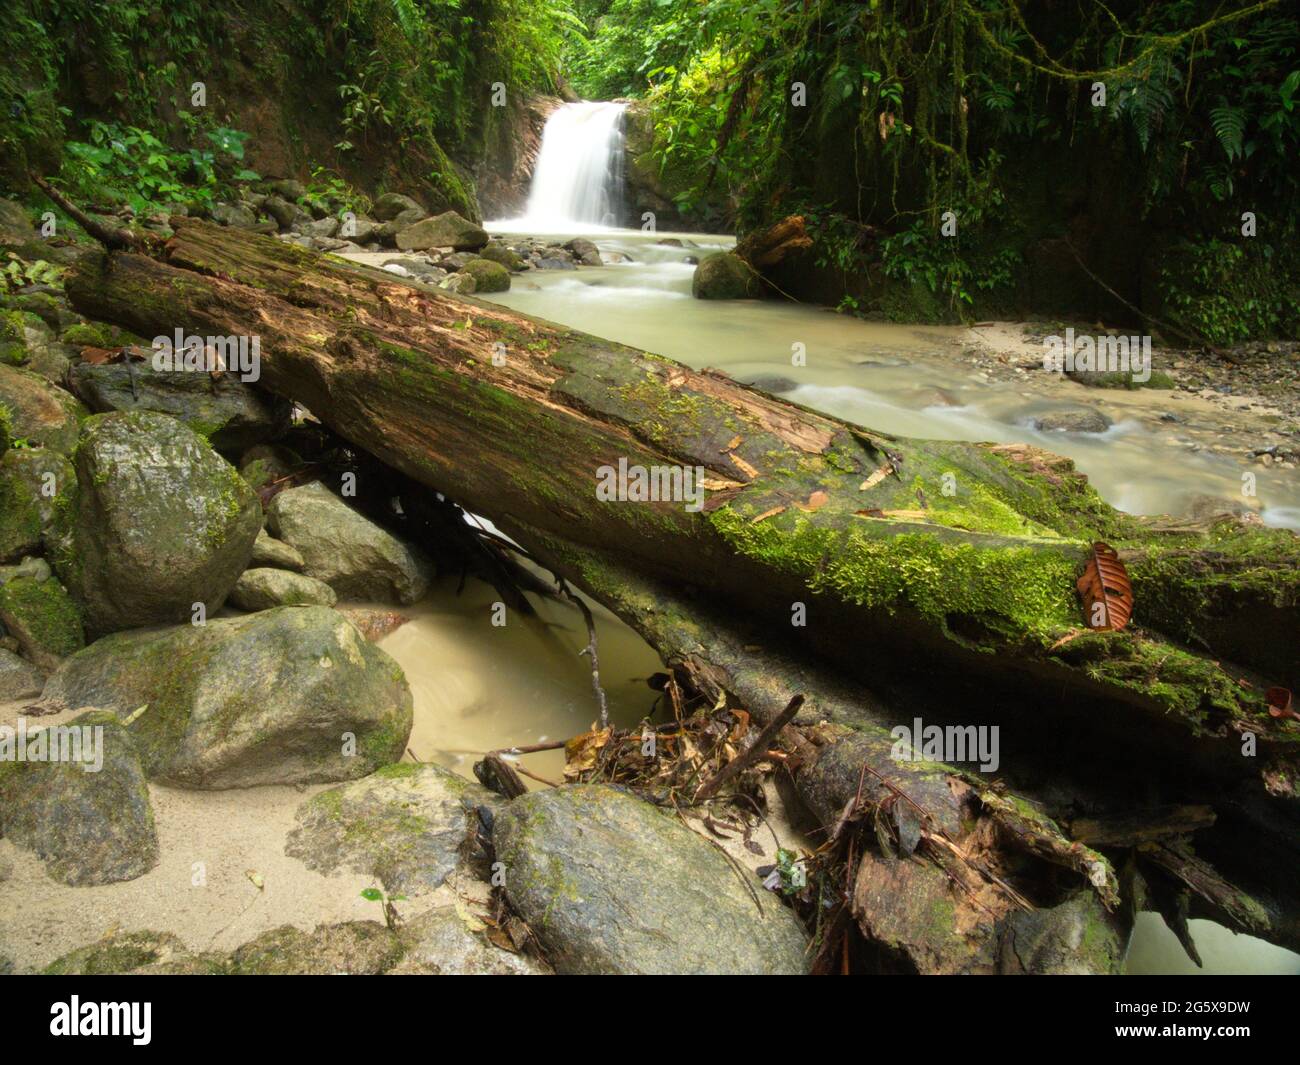 Tranquil forest scene with fallen log and no people Podocarpus National Park, Ecuador. Stock Photo